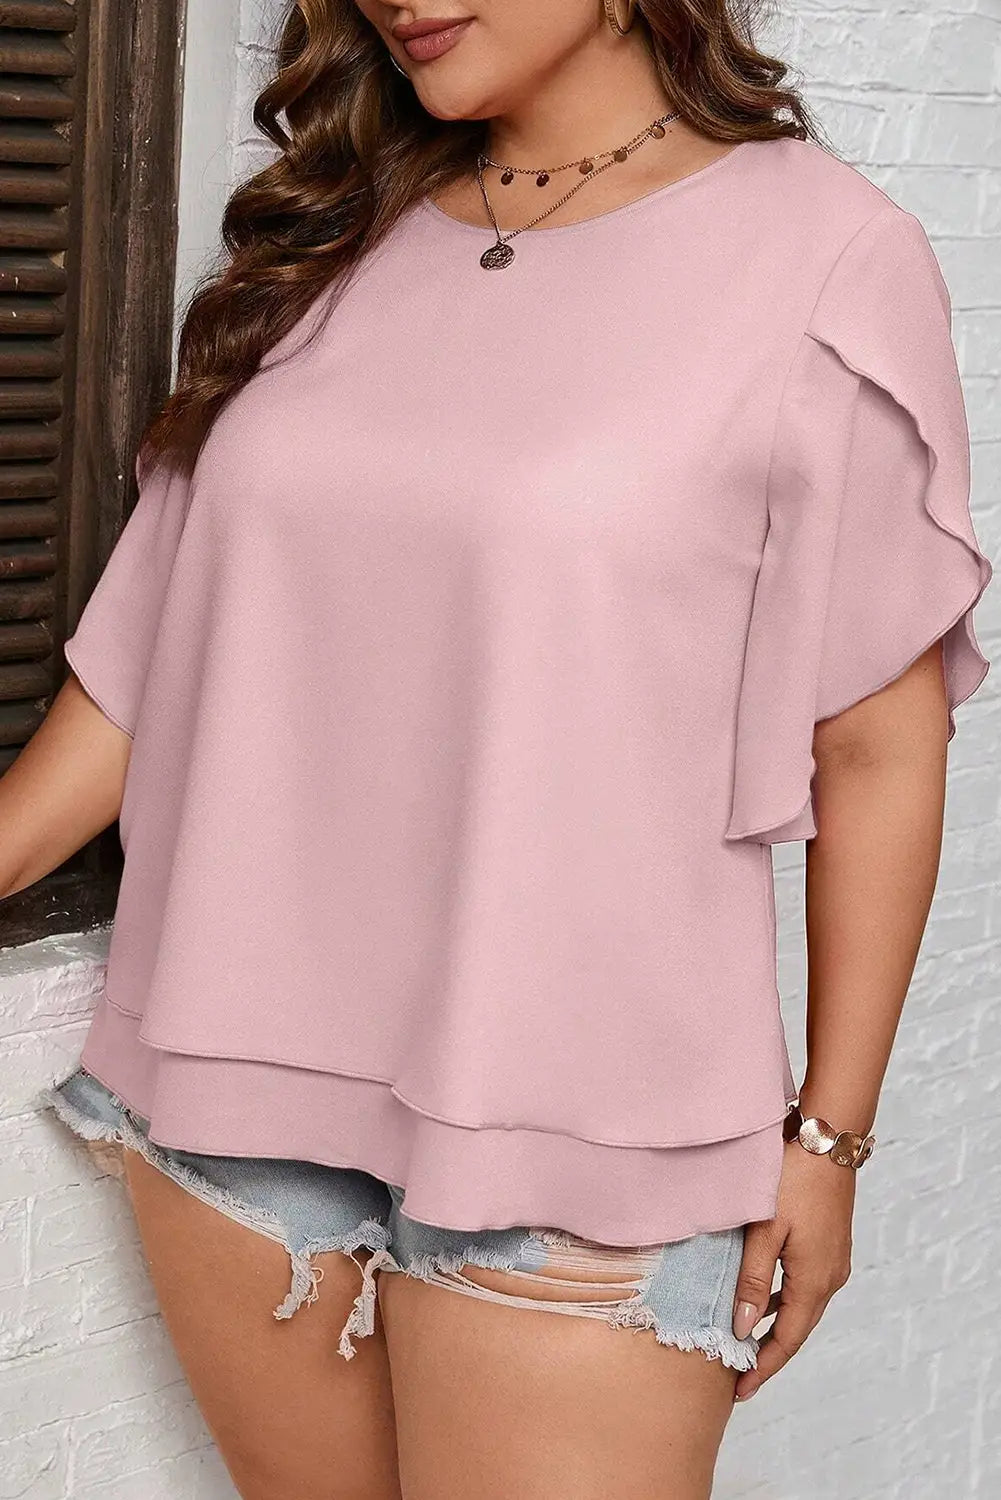 Plus size double layered blouse - blouses & shirts